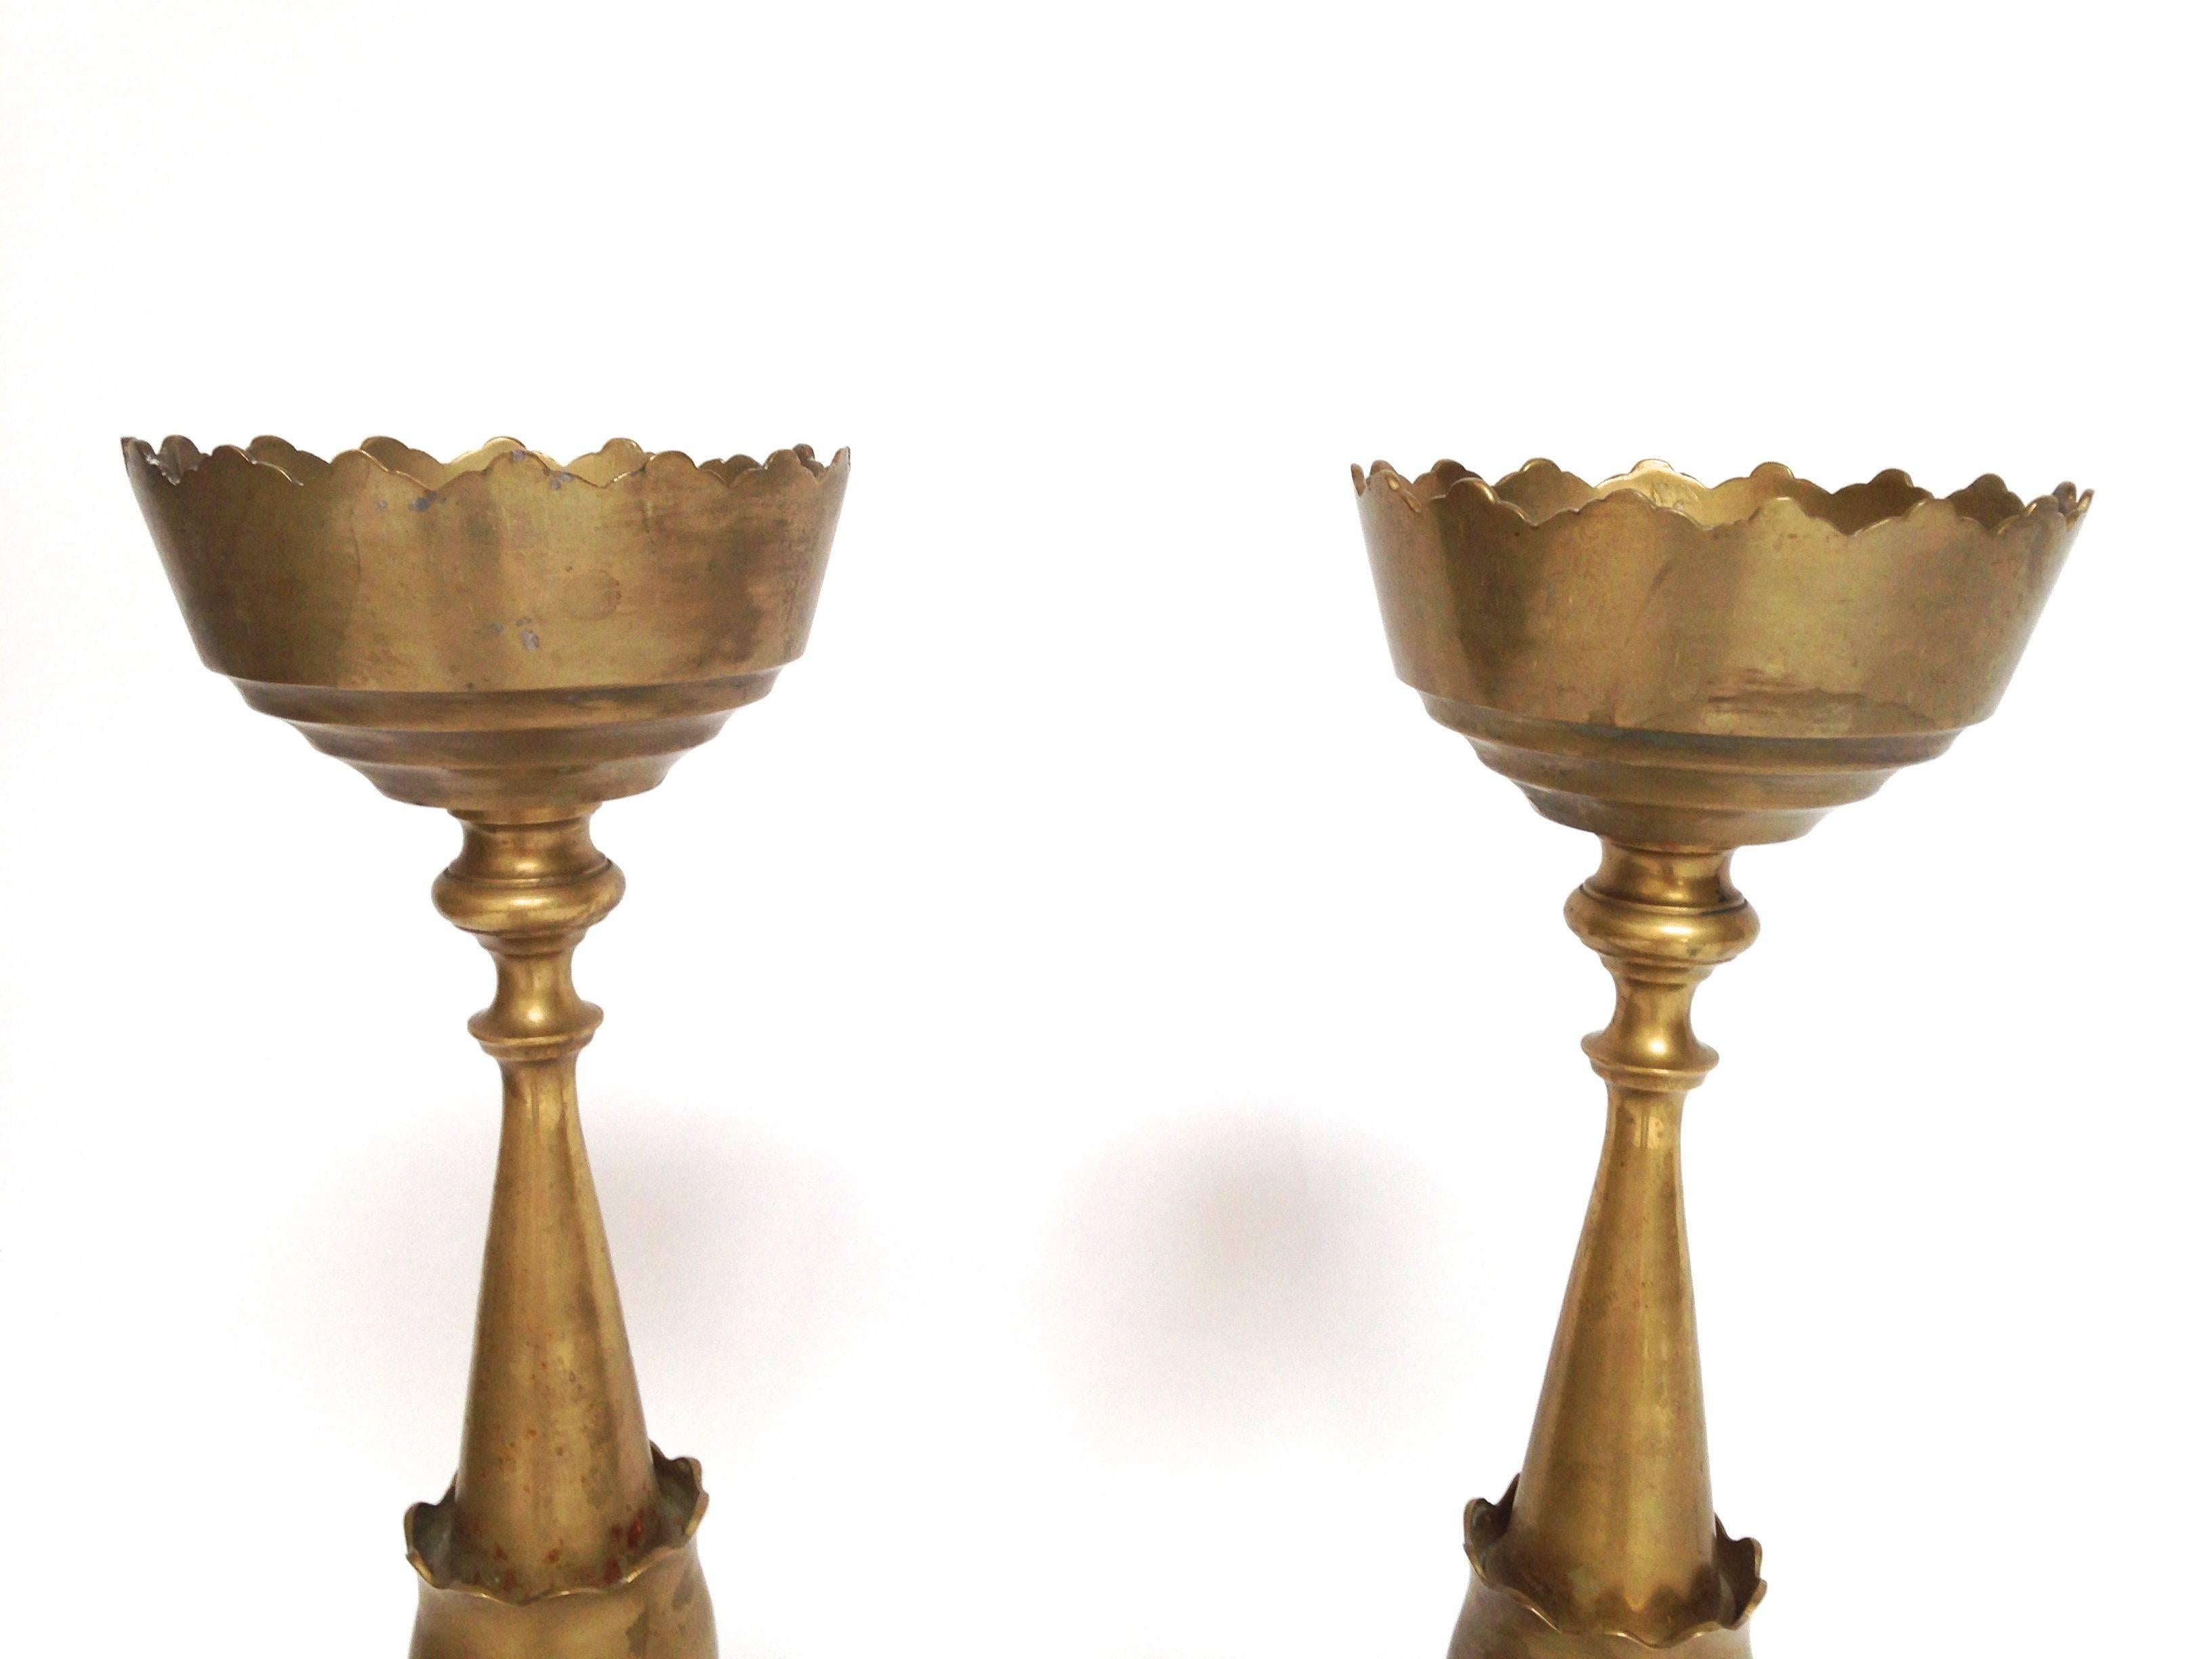 Pair of large antique brass Ottoman style candlesticks with tulip form Bobeche and long turned shaft, resting on a circular base. Very heavy and solid candle holders in excellent condition and beautiful vintage patina. Very unique. From a local San